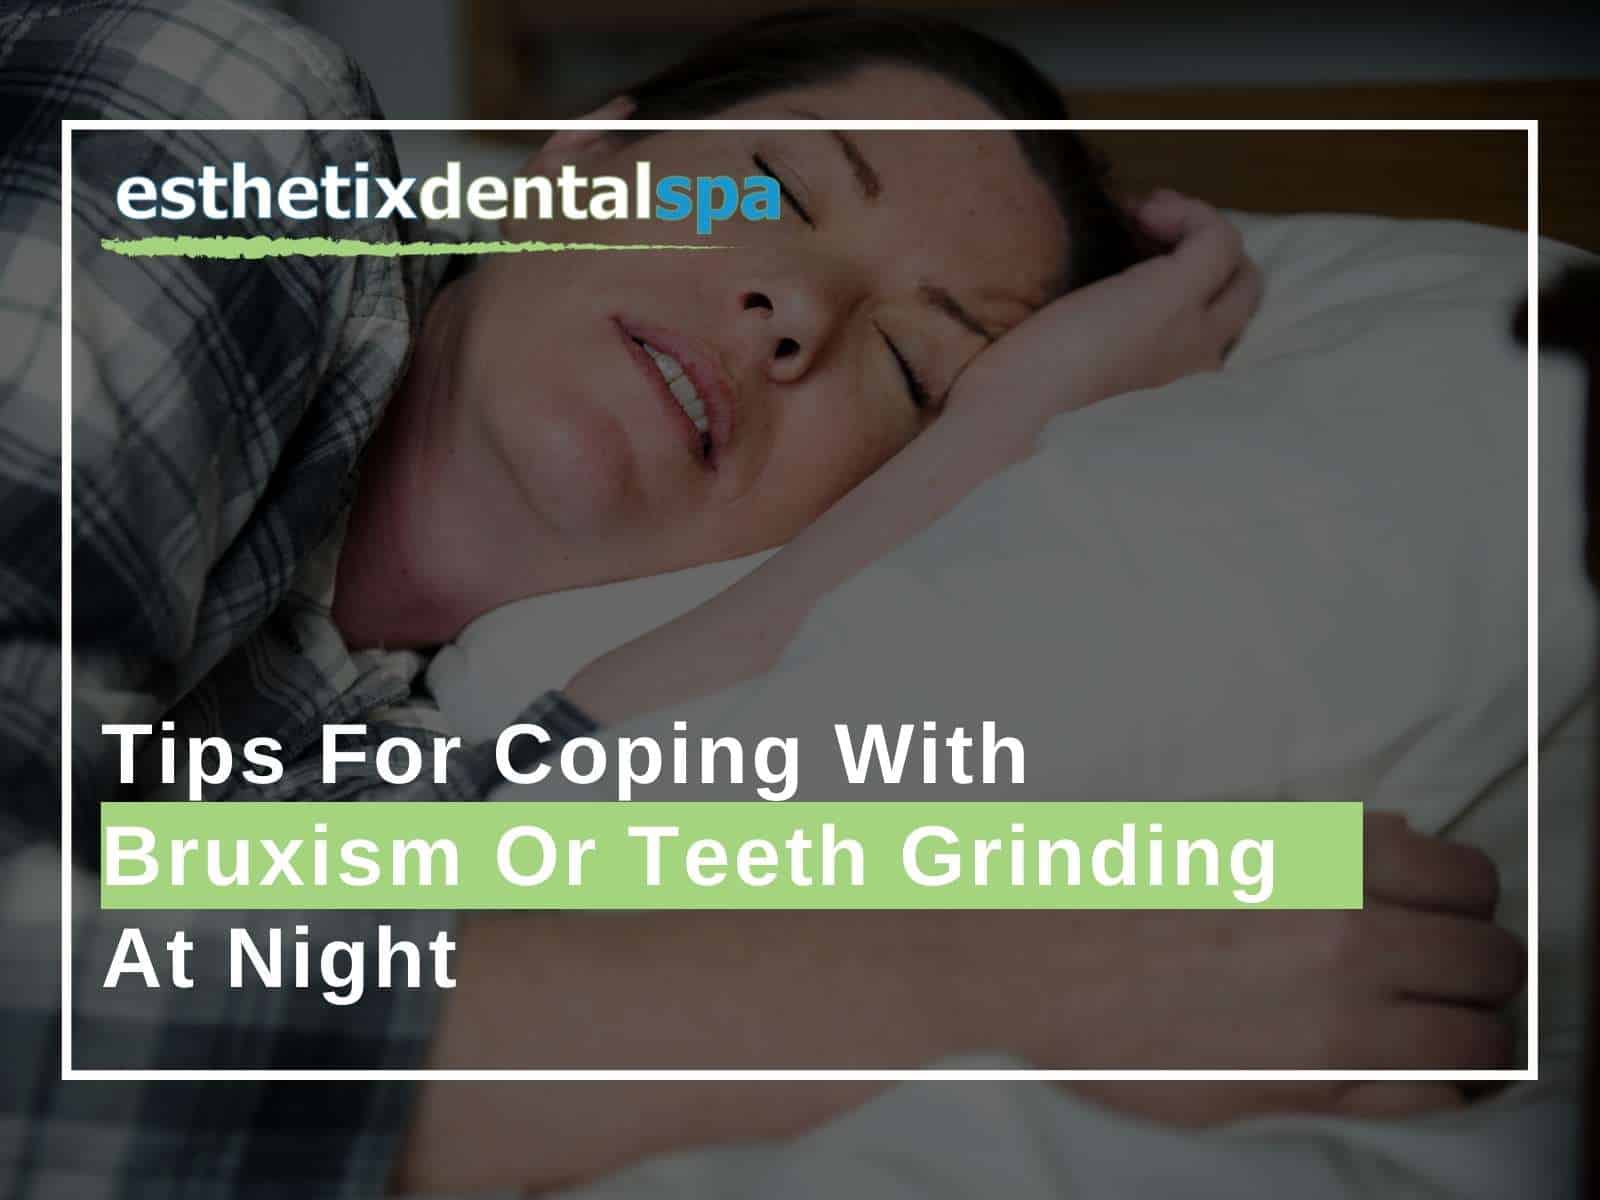 Tips For Coping With Bruxism-Or Teeth Grinding At Night